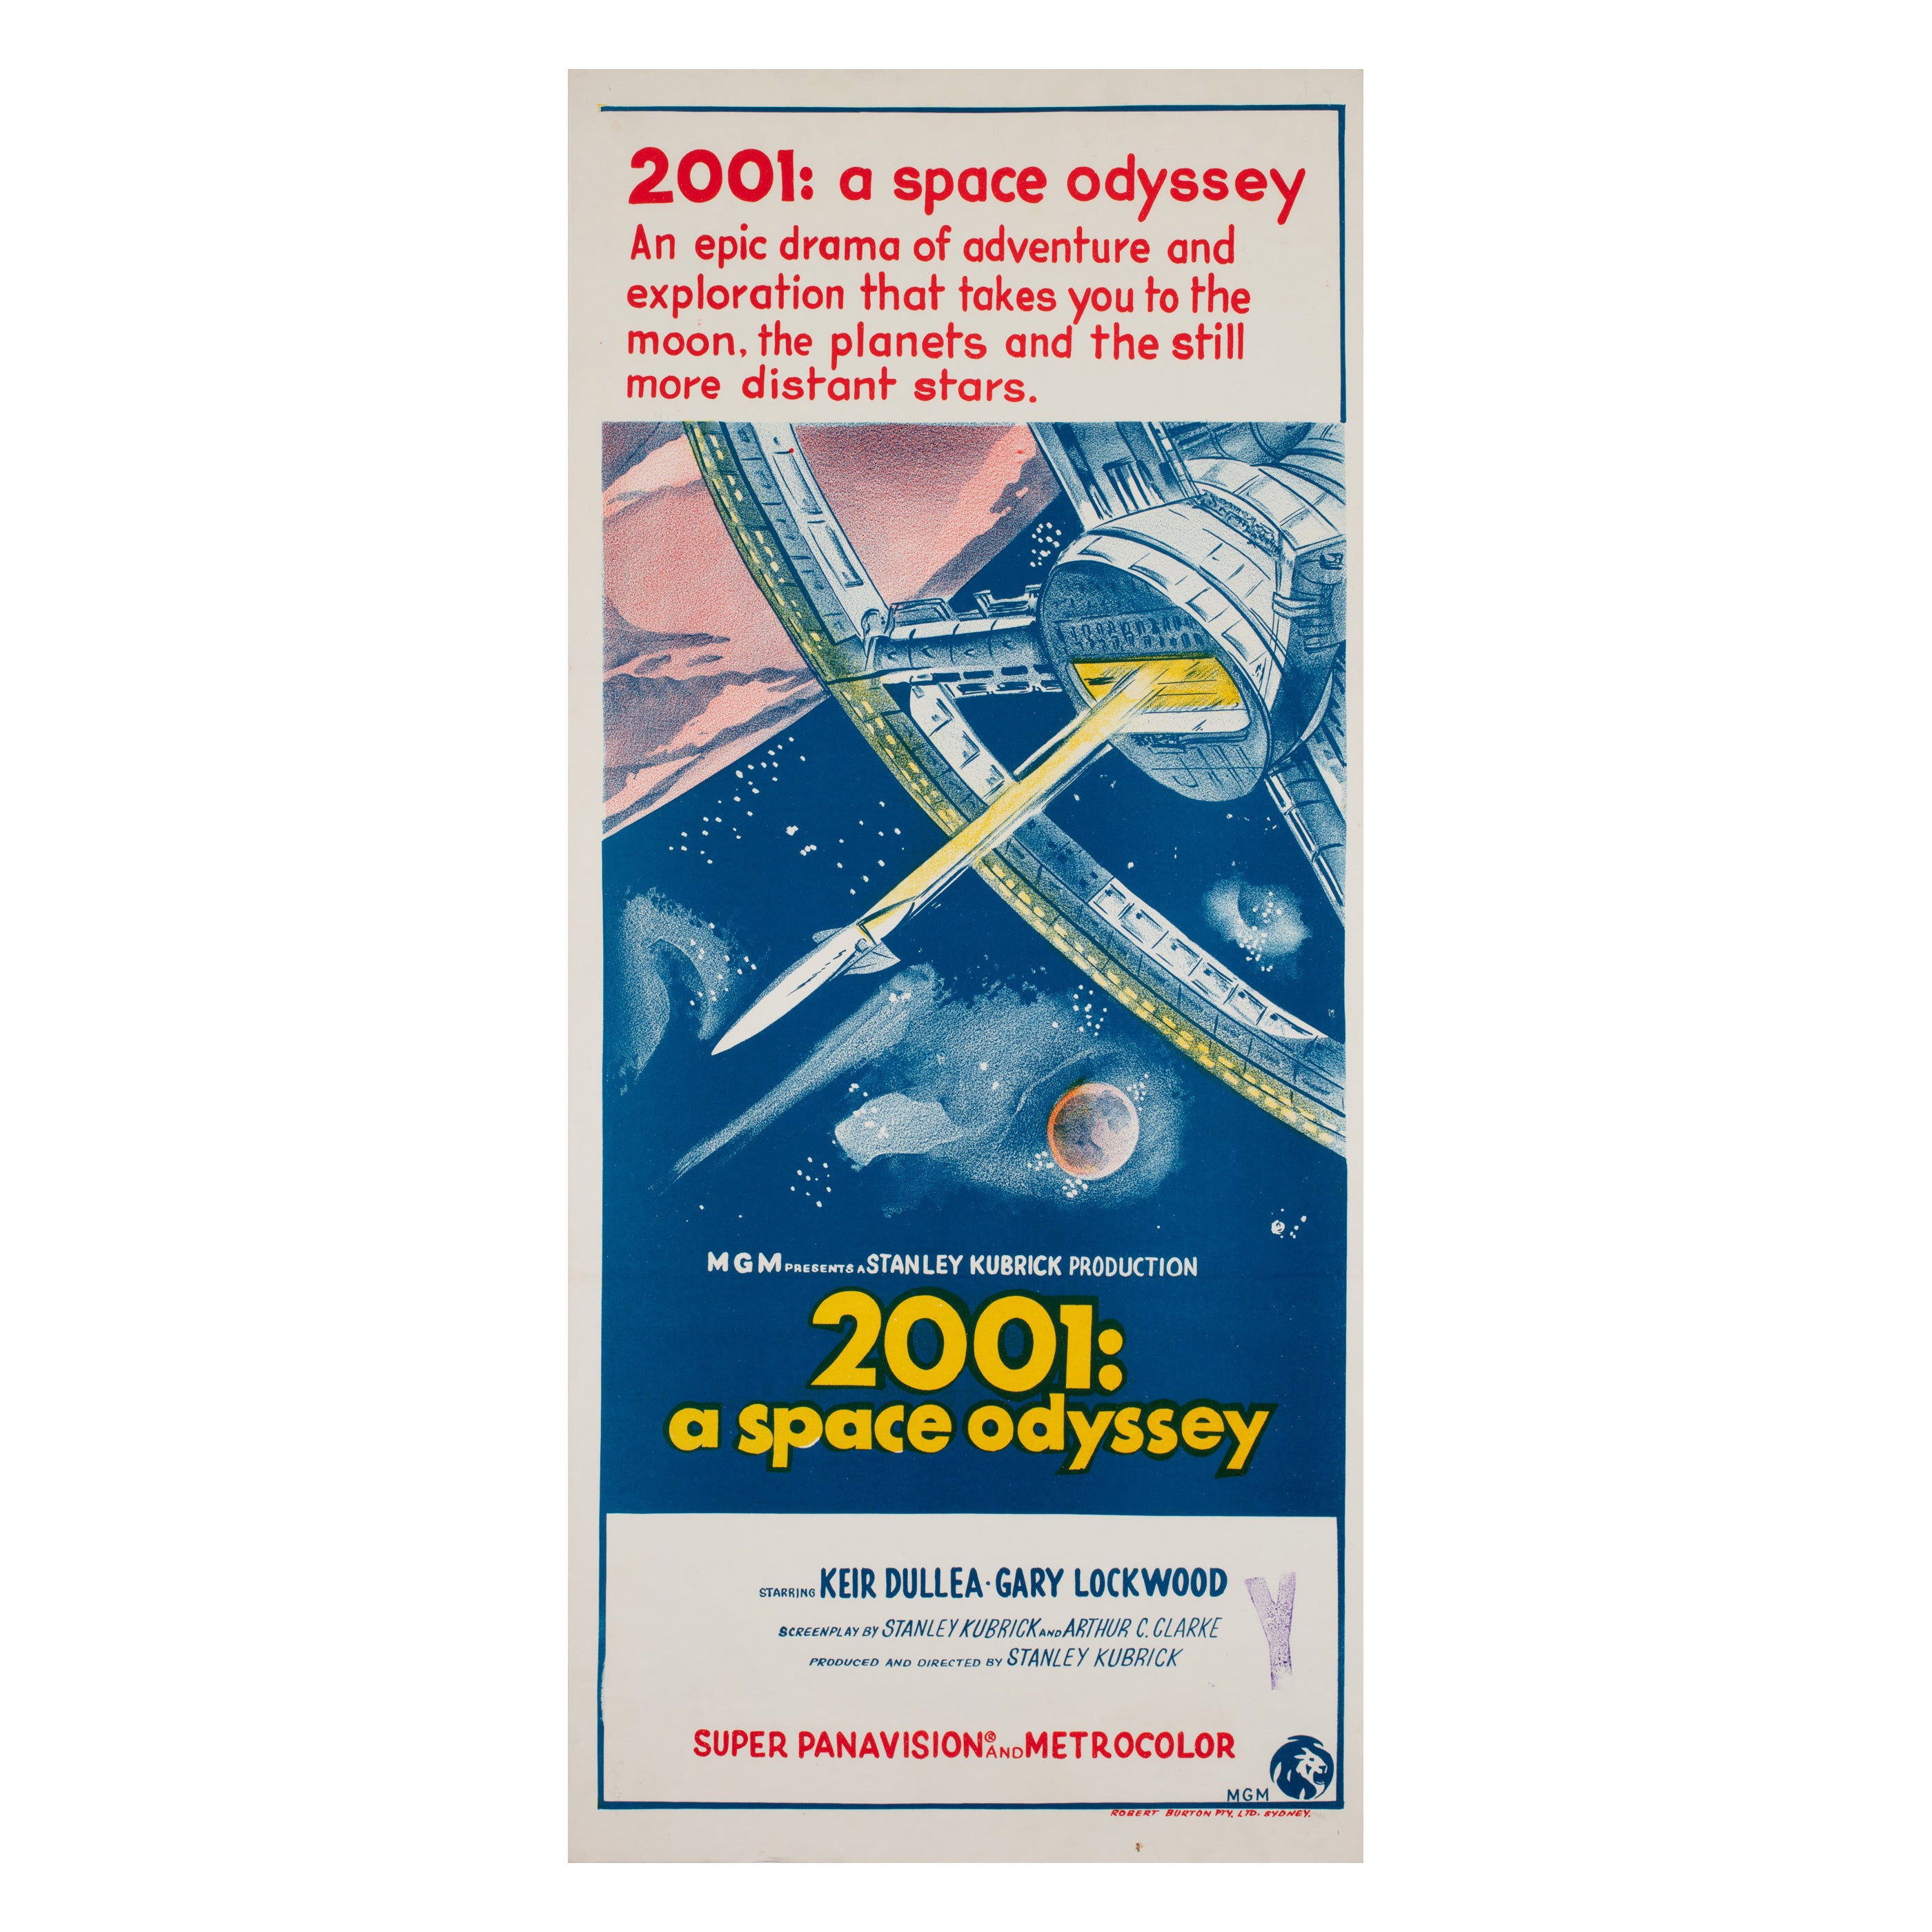 2001 a Space Odyssey 1968 Australian Daybill Film Poster For Sale